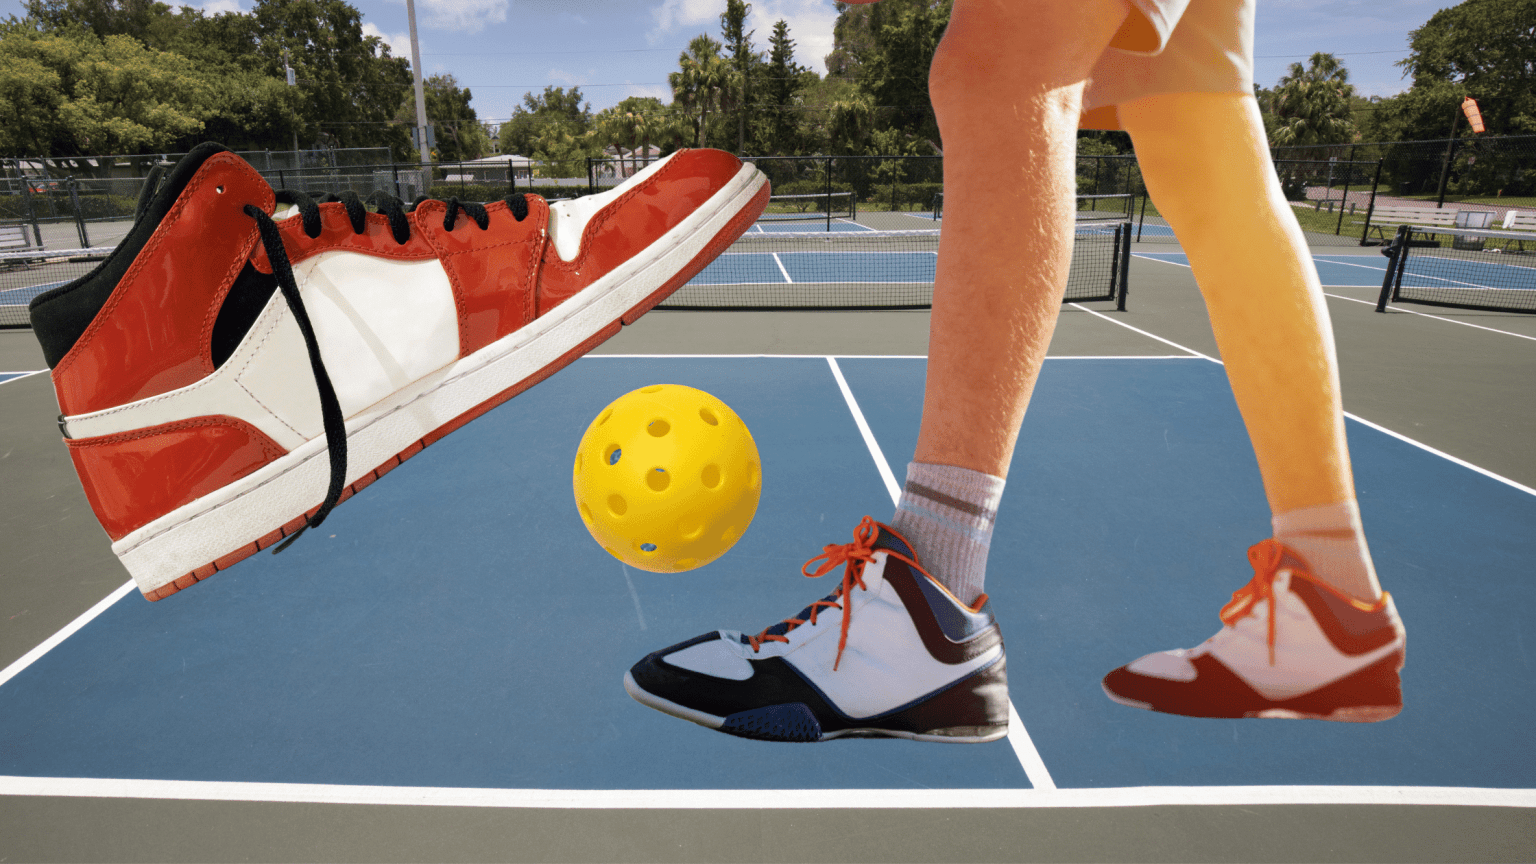 Can Basketball Shoes Be Used for Pickleball?